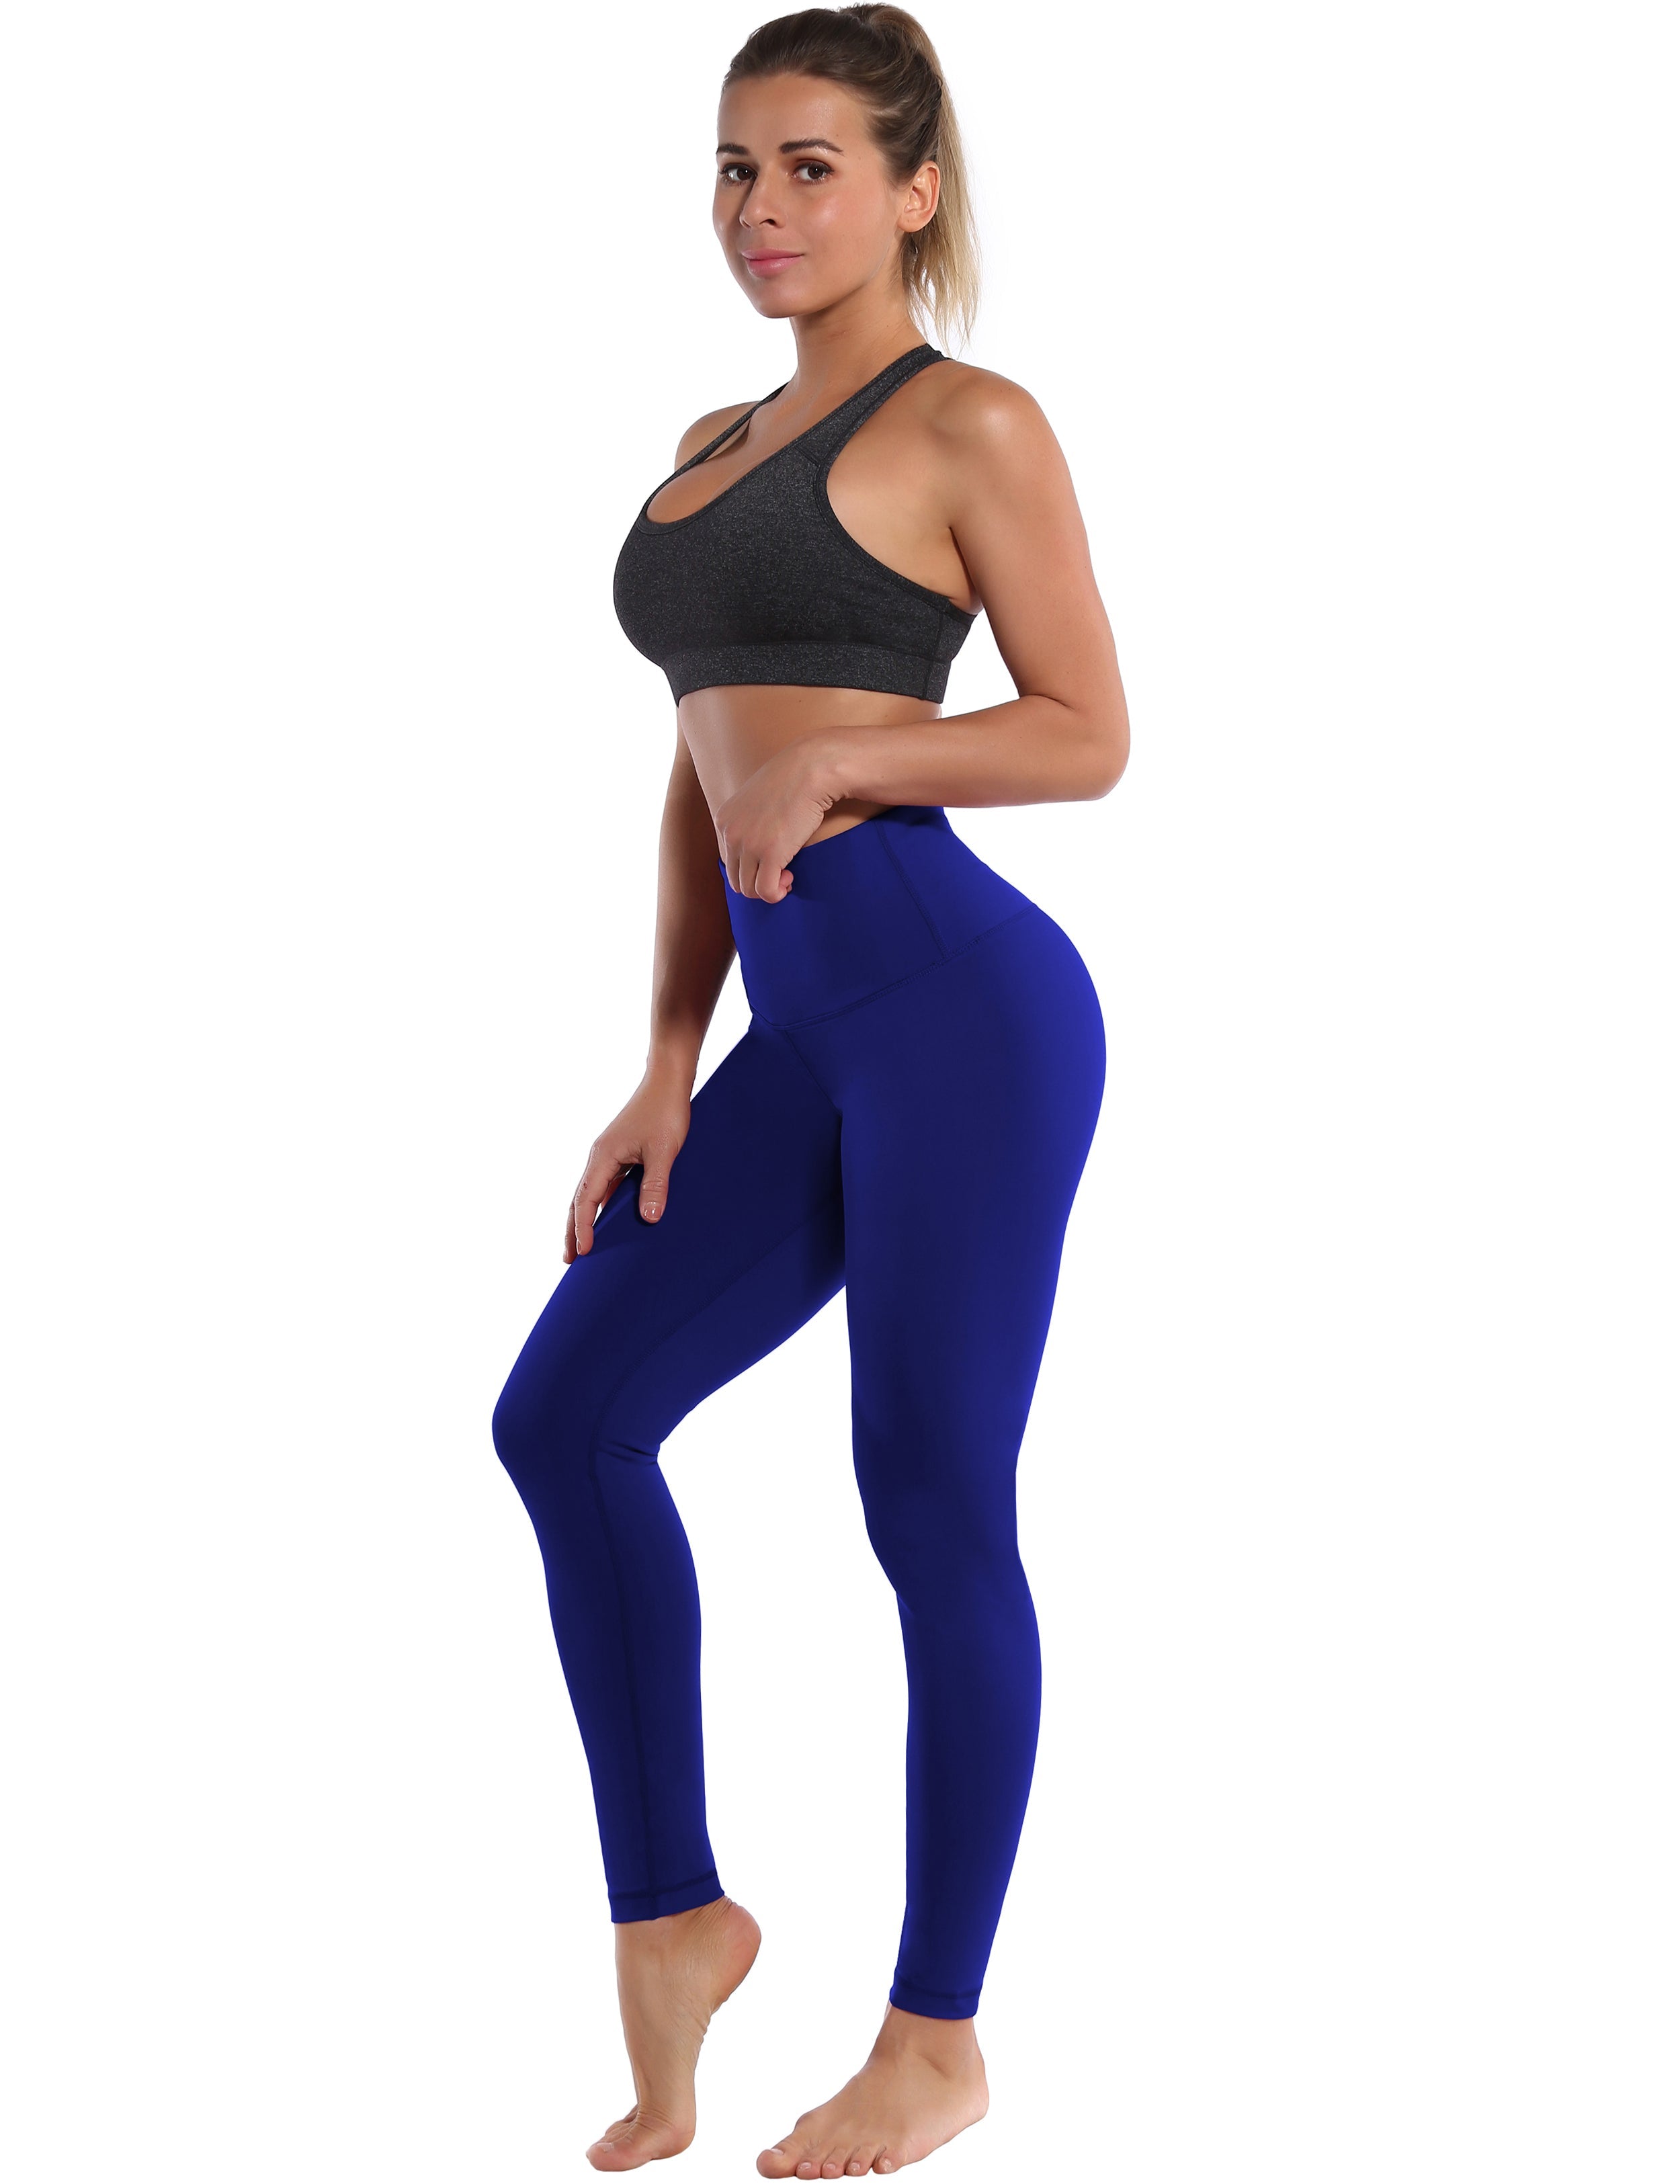 High Waist Pilates Pants navy 75%Nylon/25%Spandex Fabric doesn't attract lint easily 4-way stretch No see-through Moisture-wicking Tummy control Inner pocket Four lengths